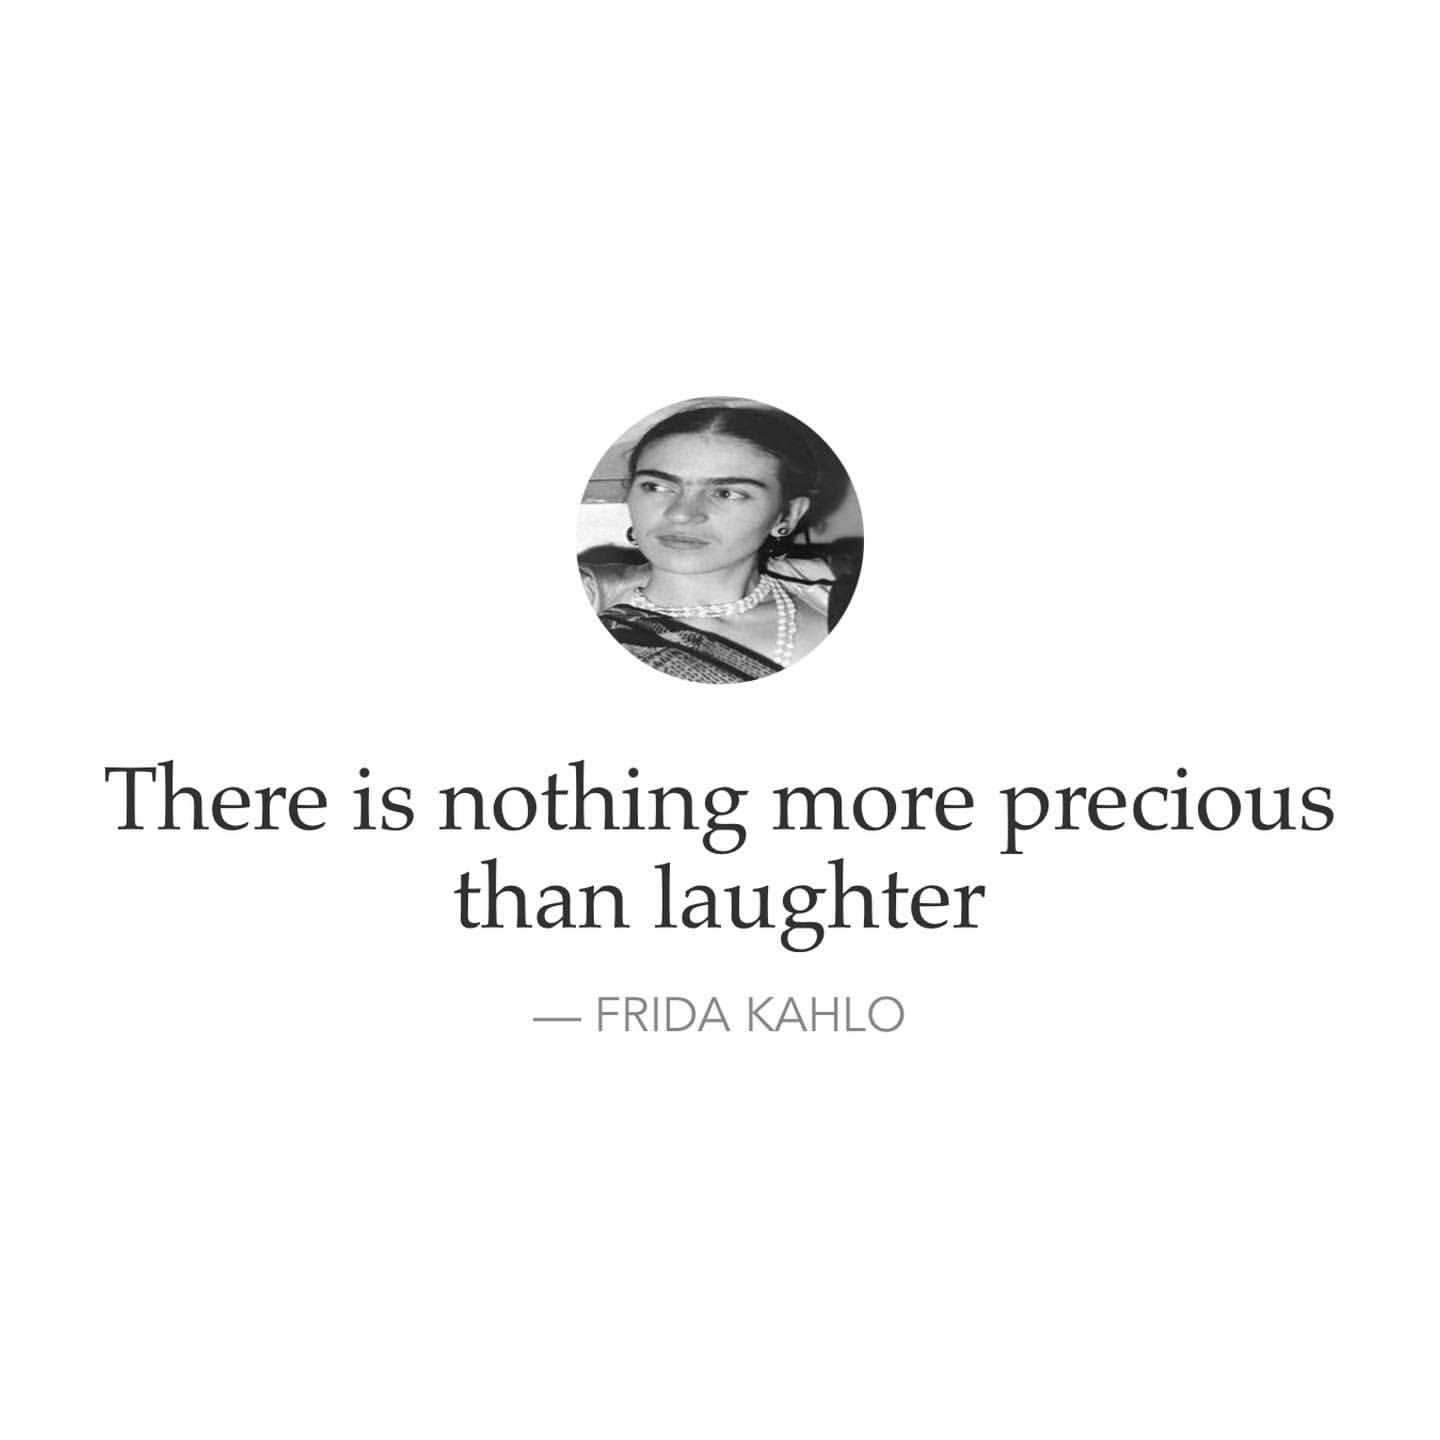 There is nothing more precious than laughter. Frida Kahlo.